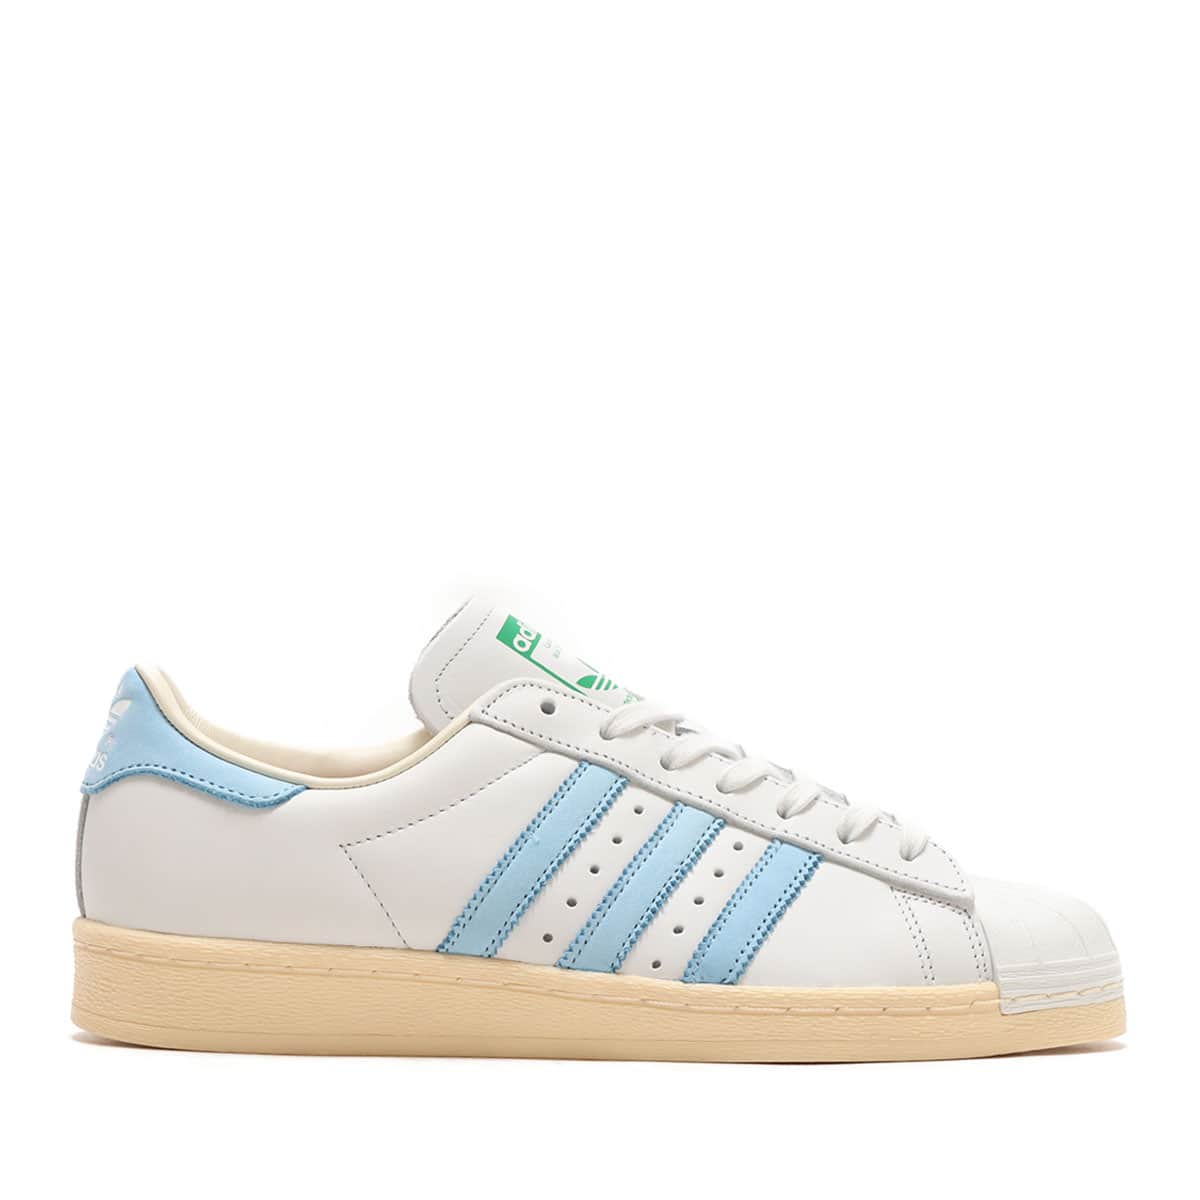 adidas SUPERSTAR 82 CRYSTAL WHITE/CLEAR BLUE/GREEN 23FW-S